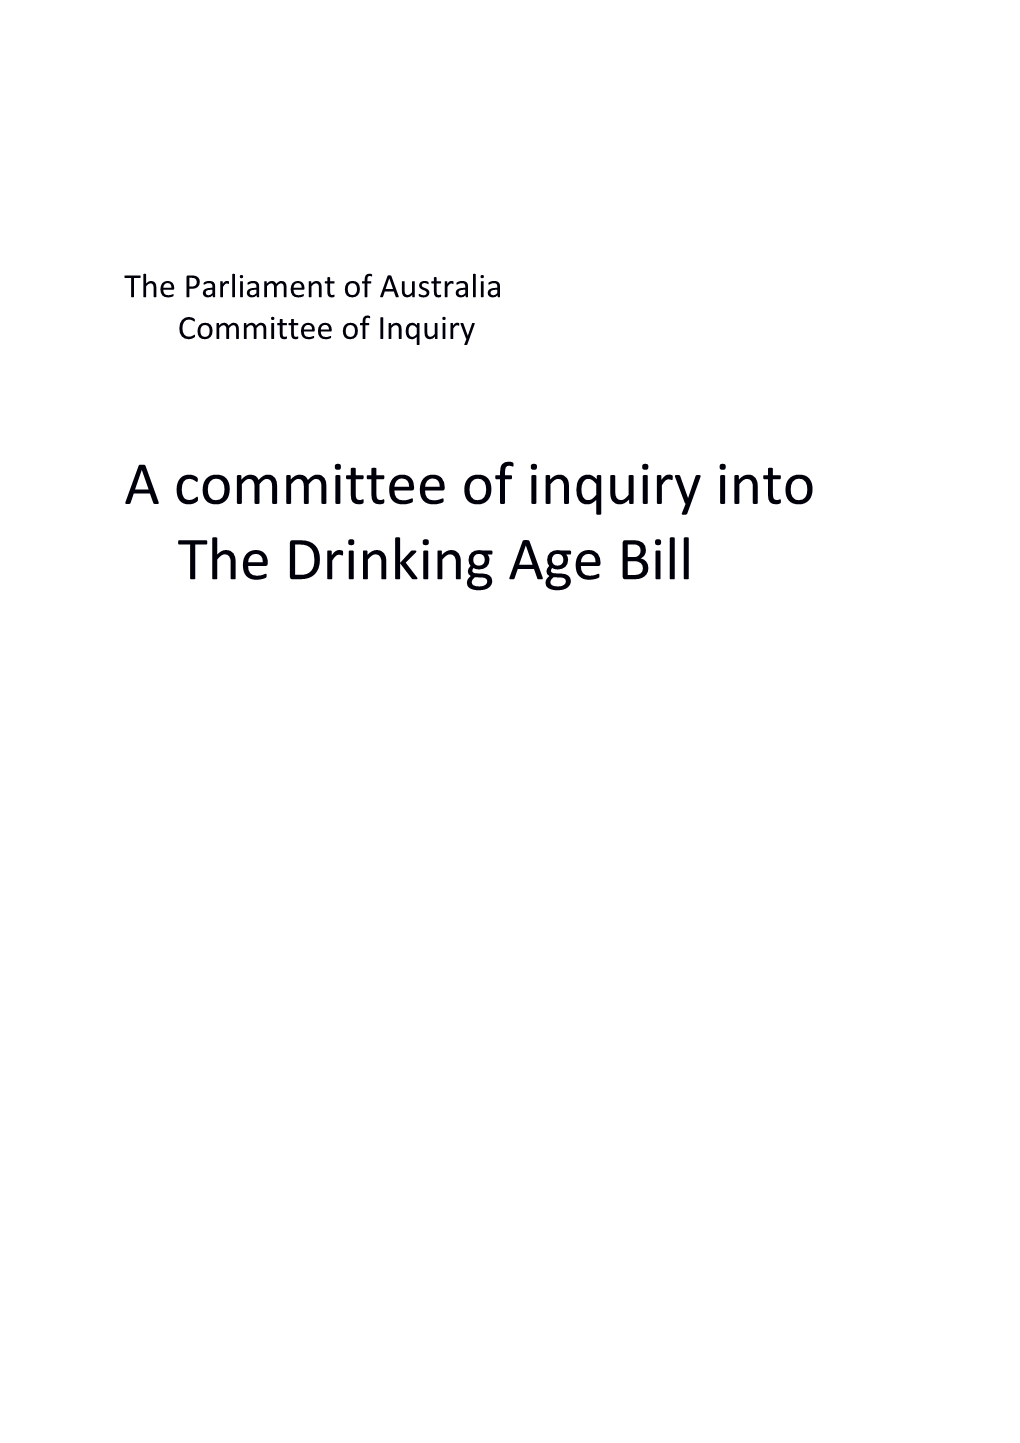 A Committee of Inquiry Into the Drinking Age Bill